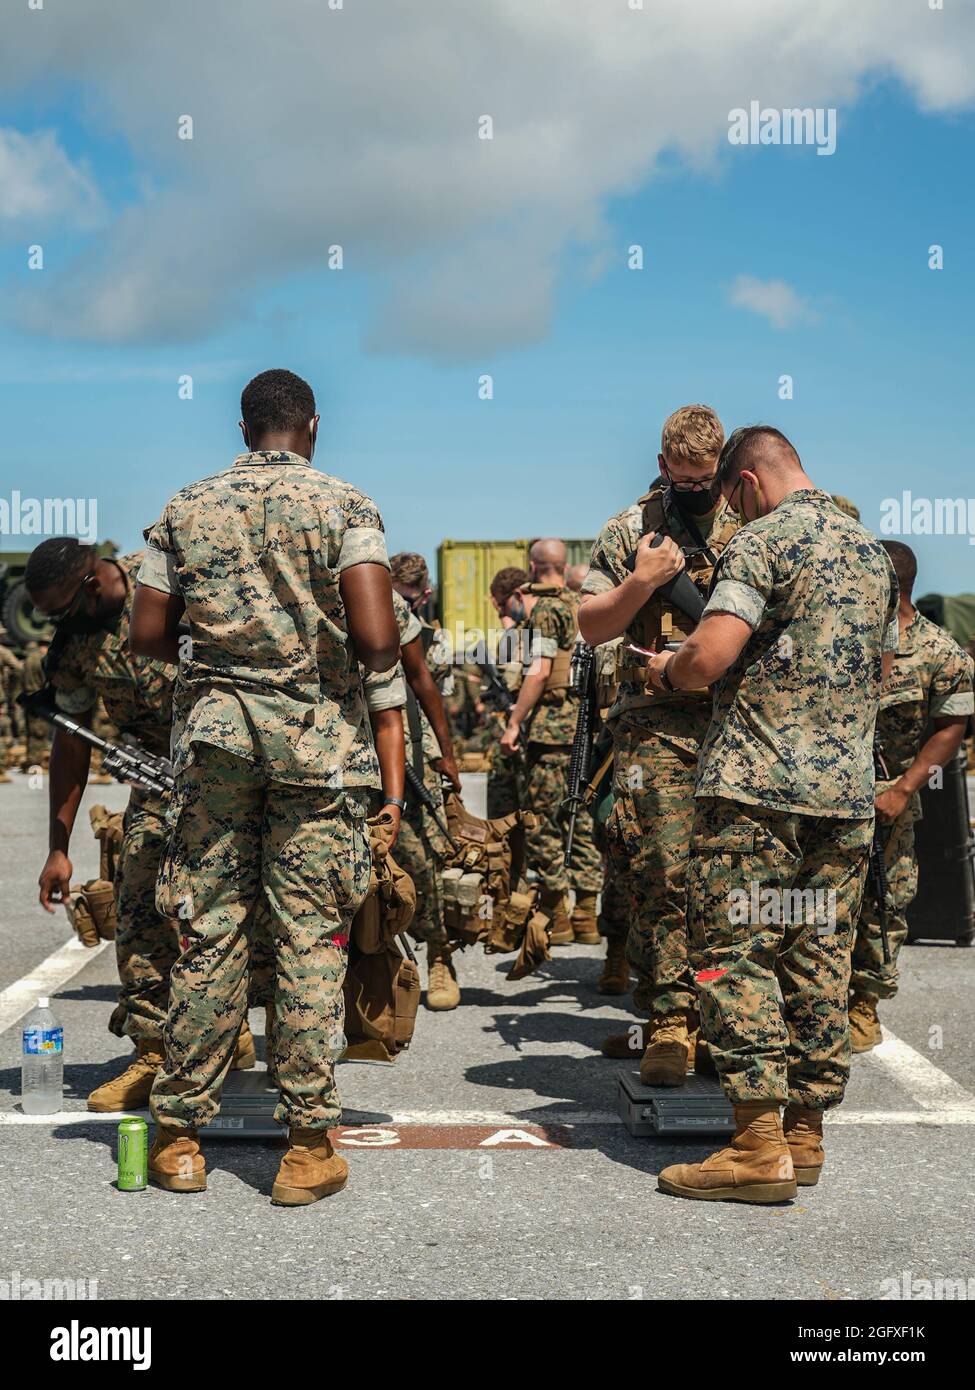 U.S. Marines with Combat Logistics Battalion 4, 3d Marine Logistics Group, and 2d Battalion, 3d Marines, 3d Marine Division, inspect gear weight during an integrated rapid response inspection at Kadena Air Base, Okinawa, Japan, August 25, 2021. Routine short-notice inspections ensure III MEF Marines remain ready to rapidly deploy and maintain regional security in the Indo-Pacific. 3d MLG, based out of Okinawa, Japan, is a forward deployed combat unit that serves as III Marine Expeditionary Force’s comprehensive logistics and combat service support backbone for operations throughout the Indo-Pa Stock Photo